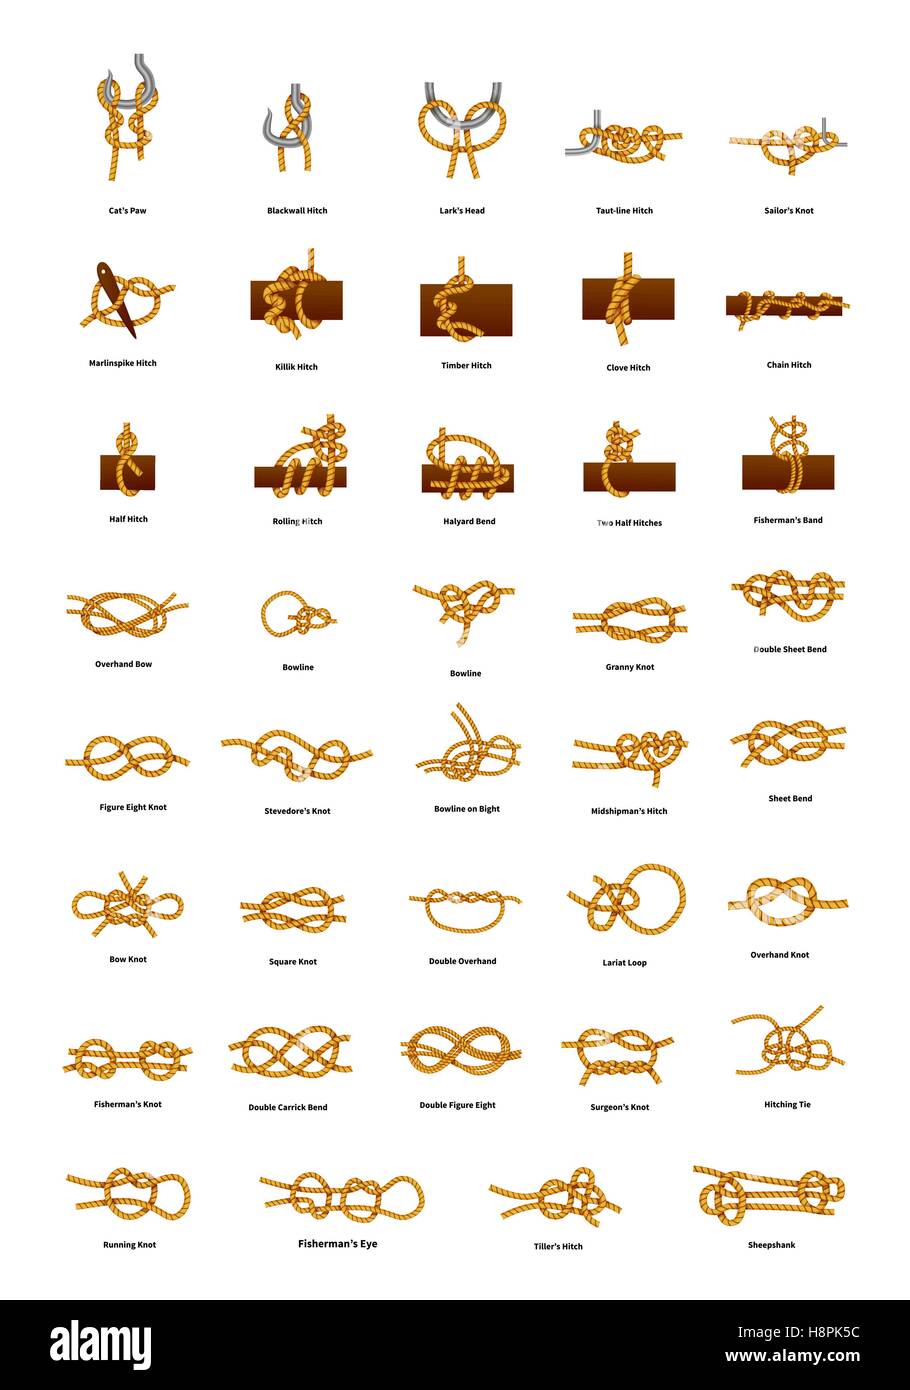 Sea knots Stock Vector Images - Alamy